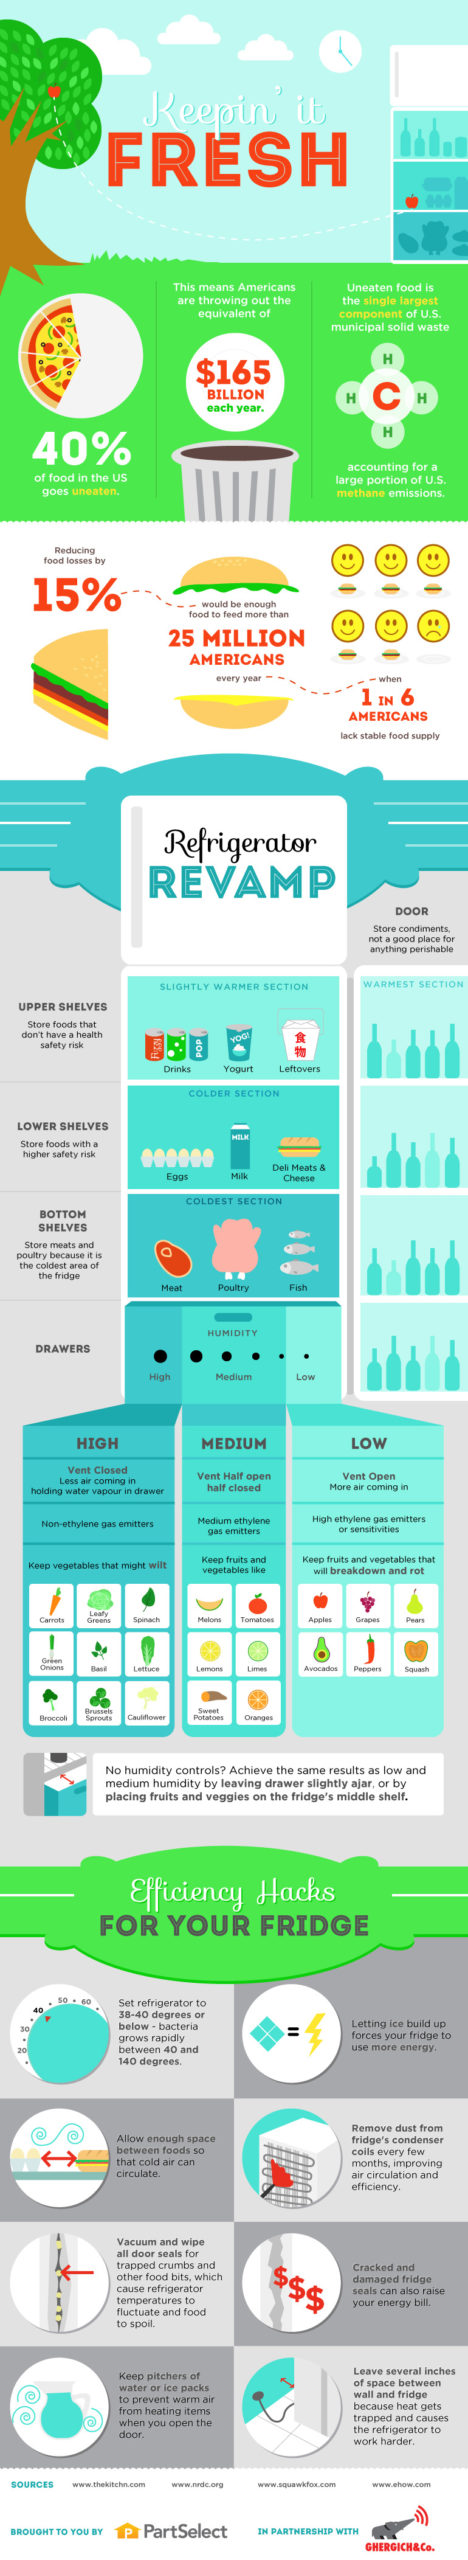 This Infographic Shows You How To Organise Your Fridge